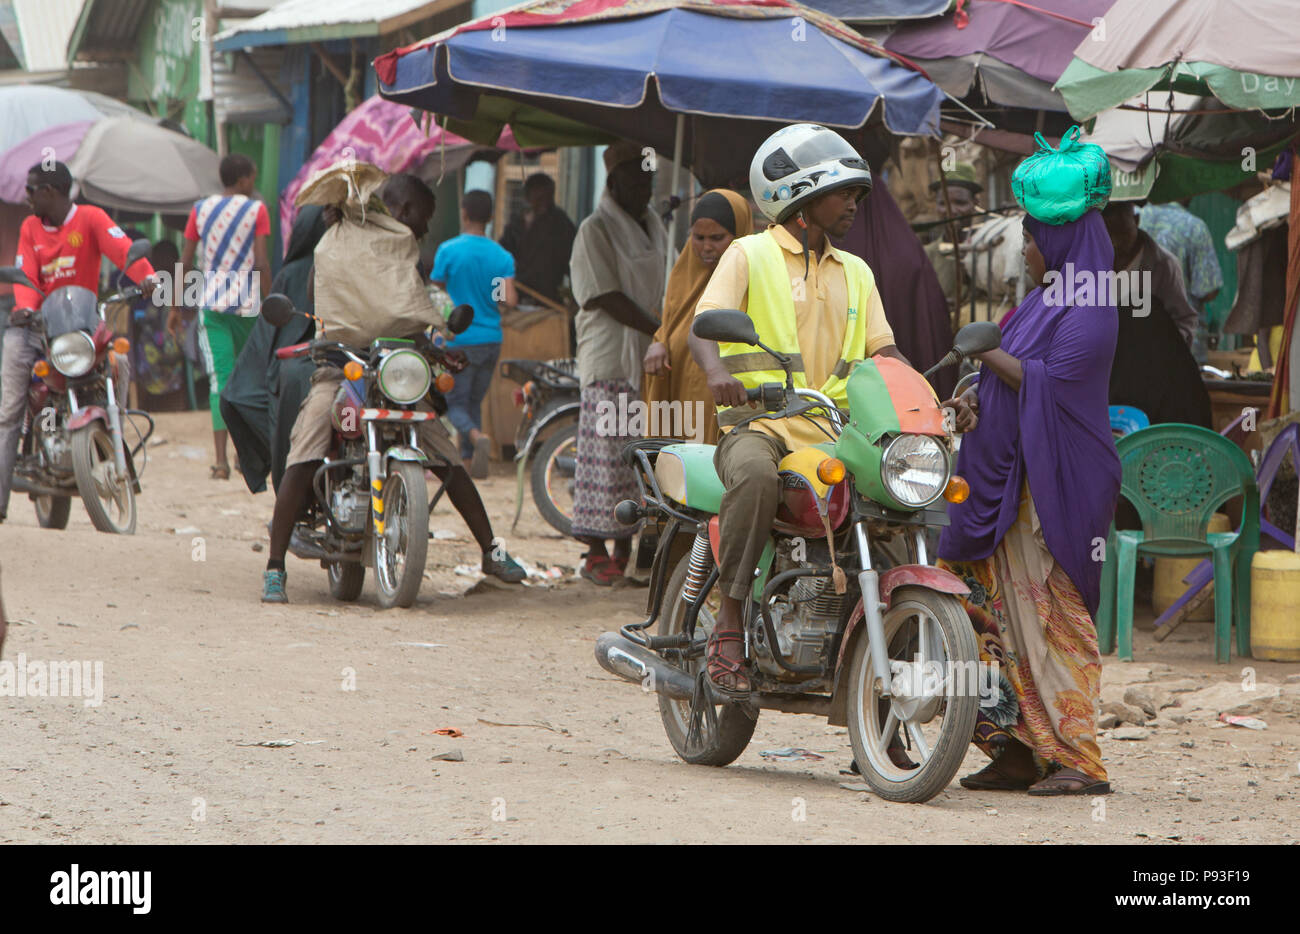 Kakuma, Kenya - Street scene with people and motorcycles. Motorcycle traffic on a busy unpaved road. Stock Photo